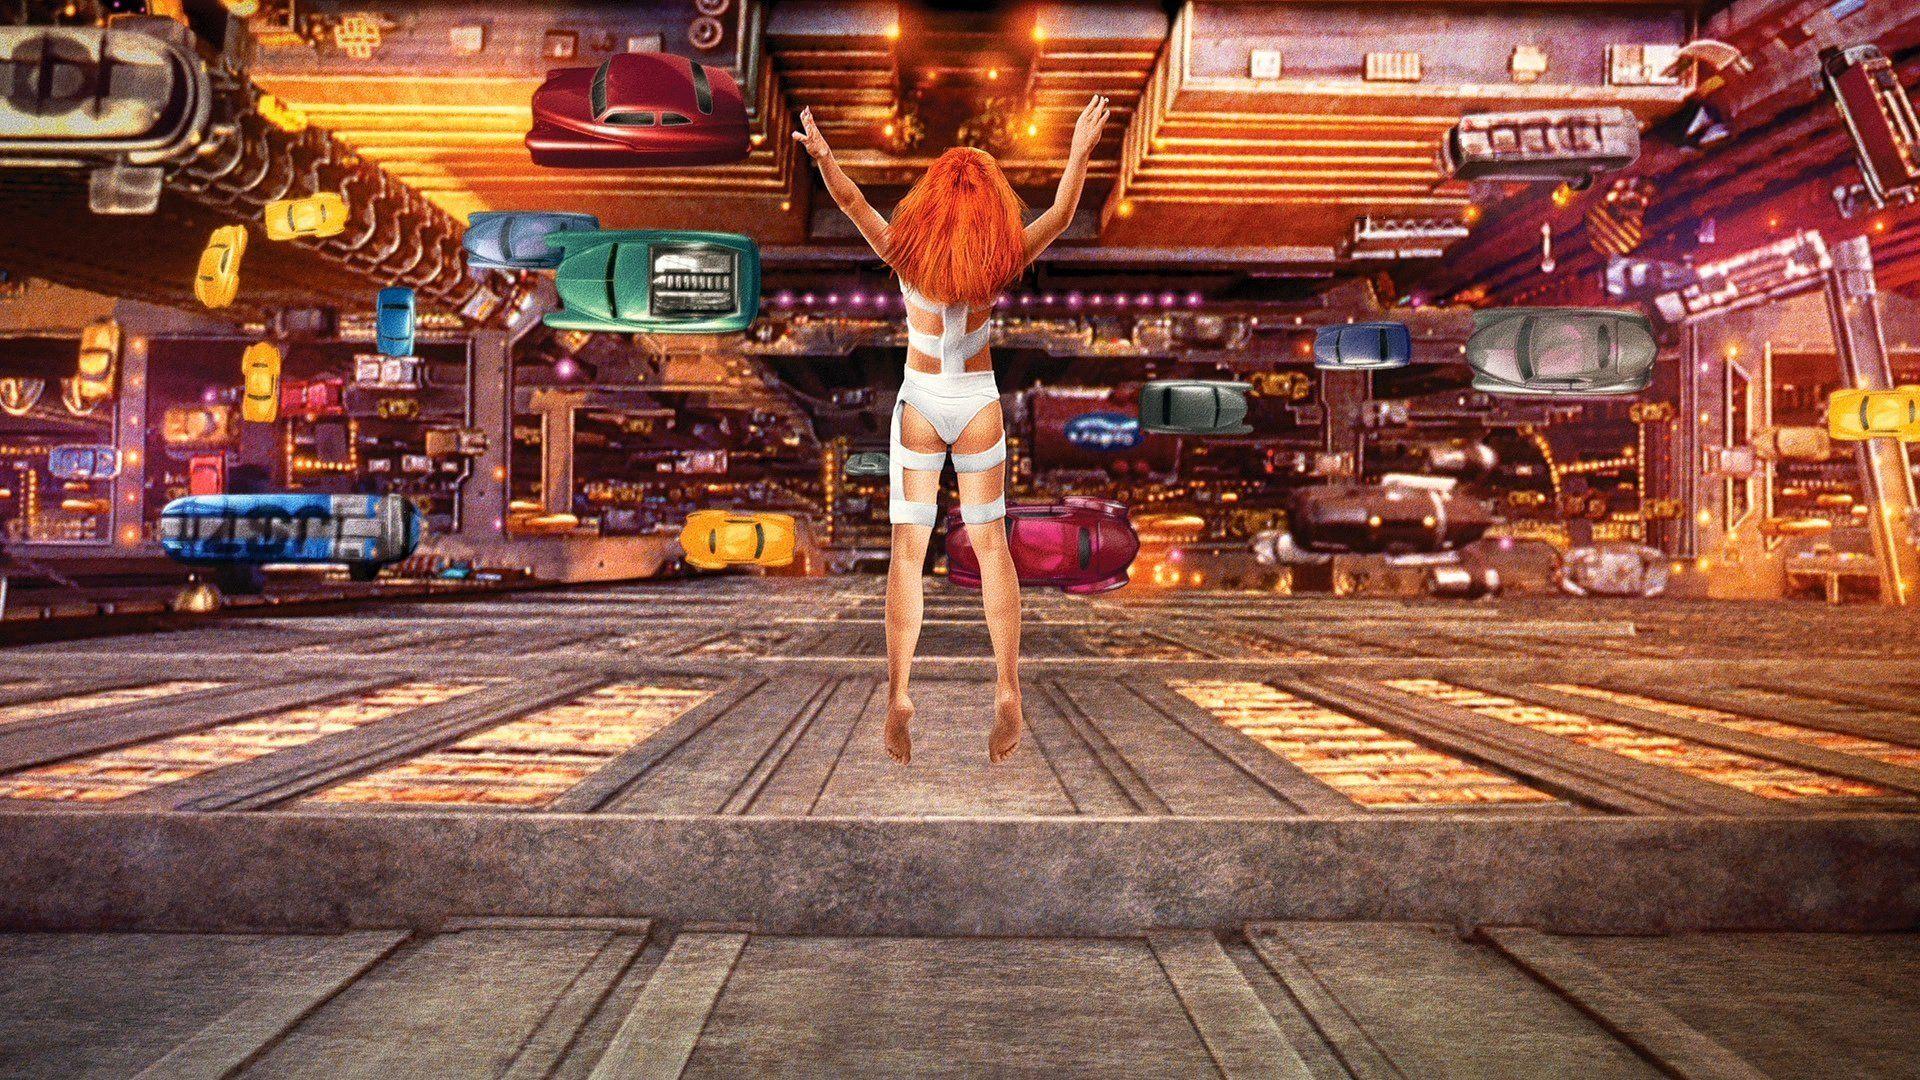 leeloo fifth element rigged download